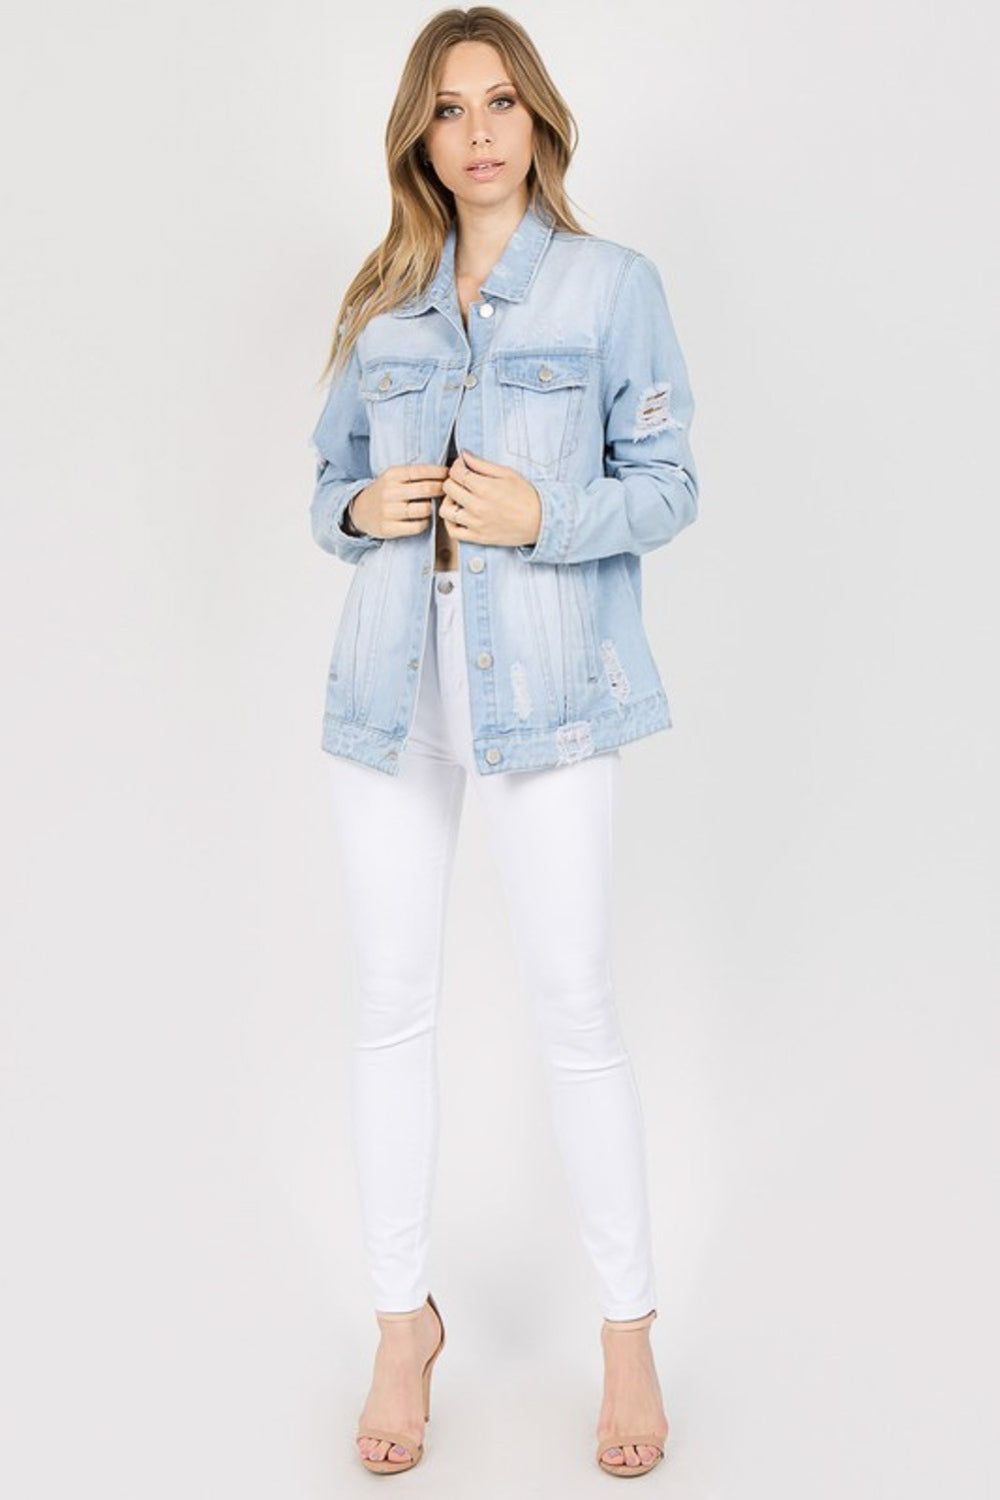 American Bazi Letter Patched Distressed Denim Jacket - House of Binx 